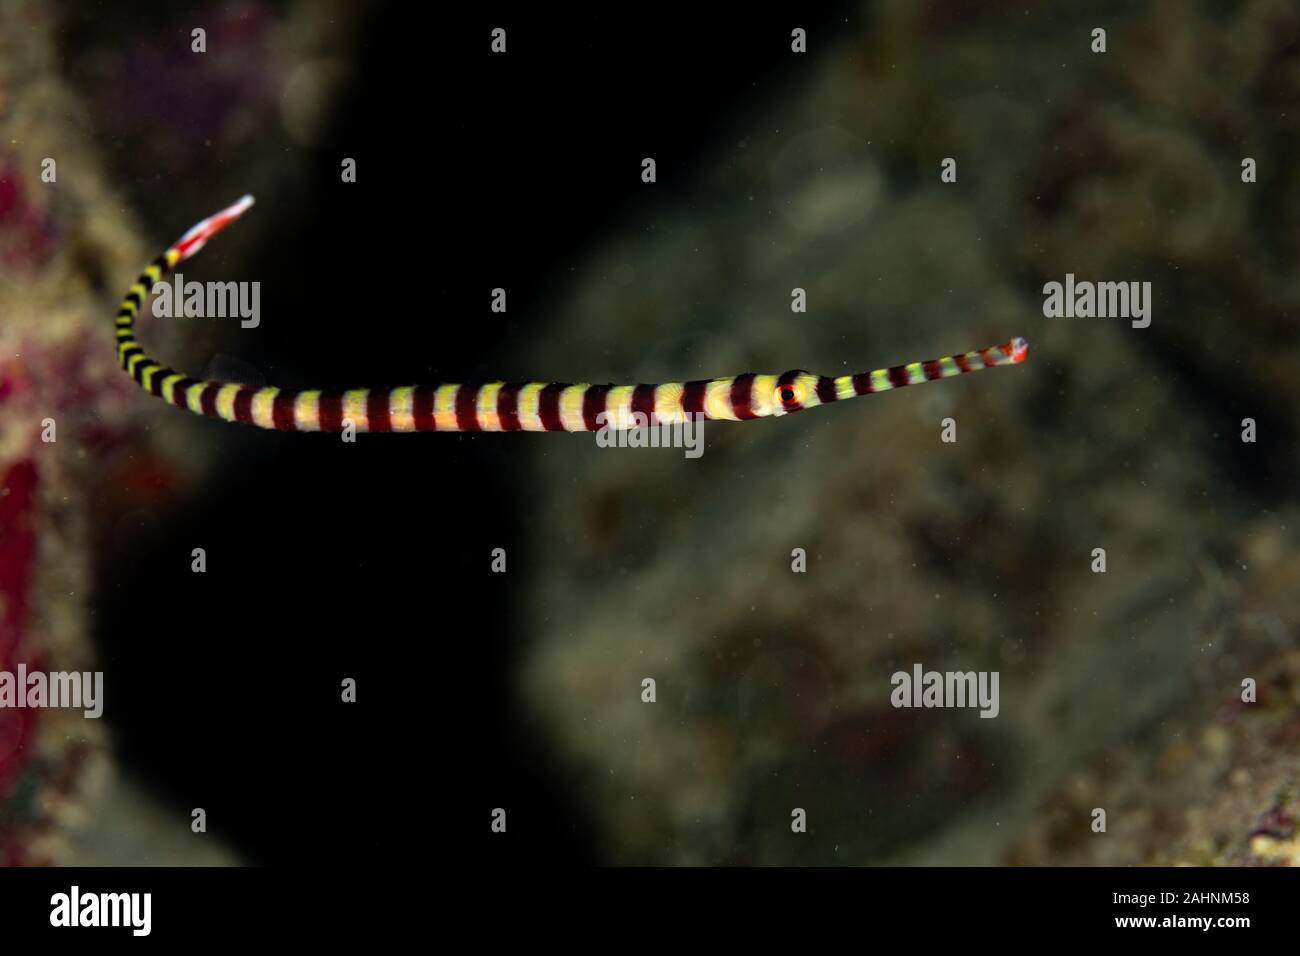 Yellowbanded pipefish, Dunckerocampus pessuliferus, is a species of marine fish of the family Syngnathidae Stock Photo